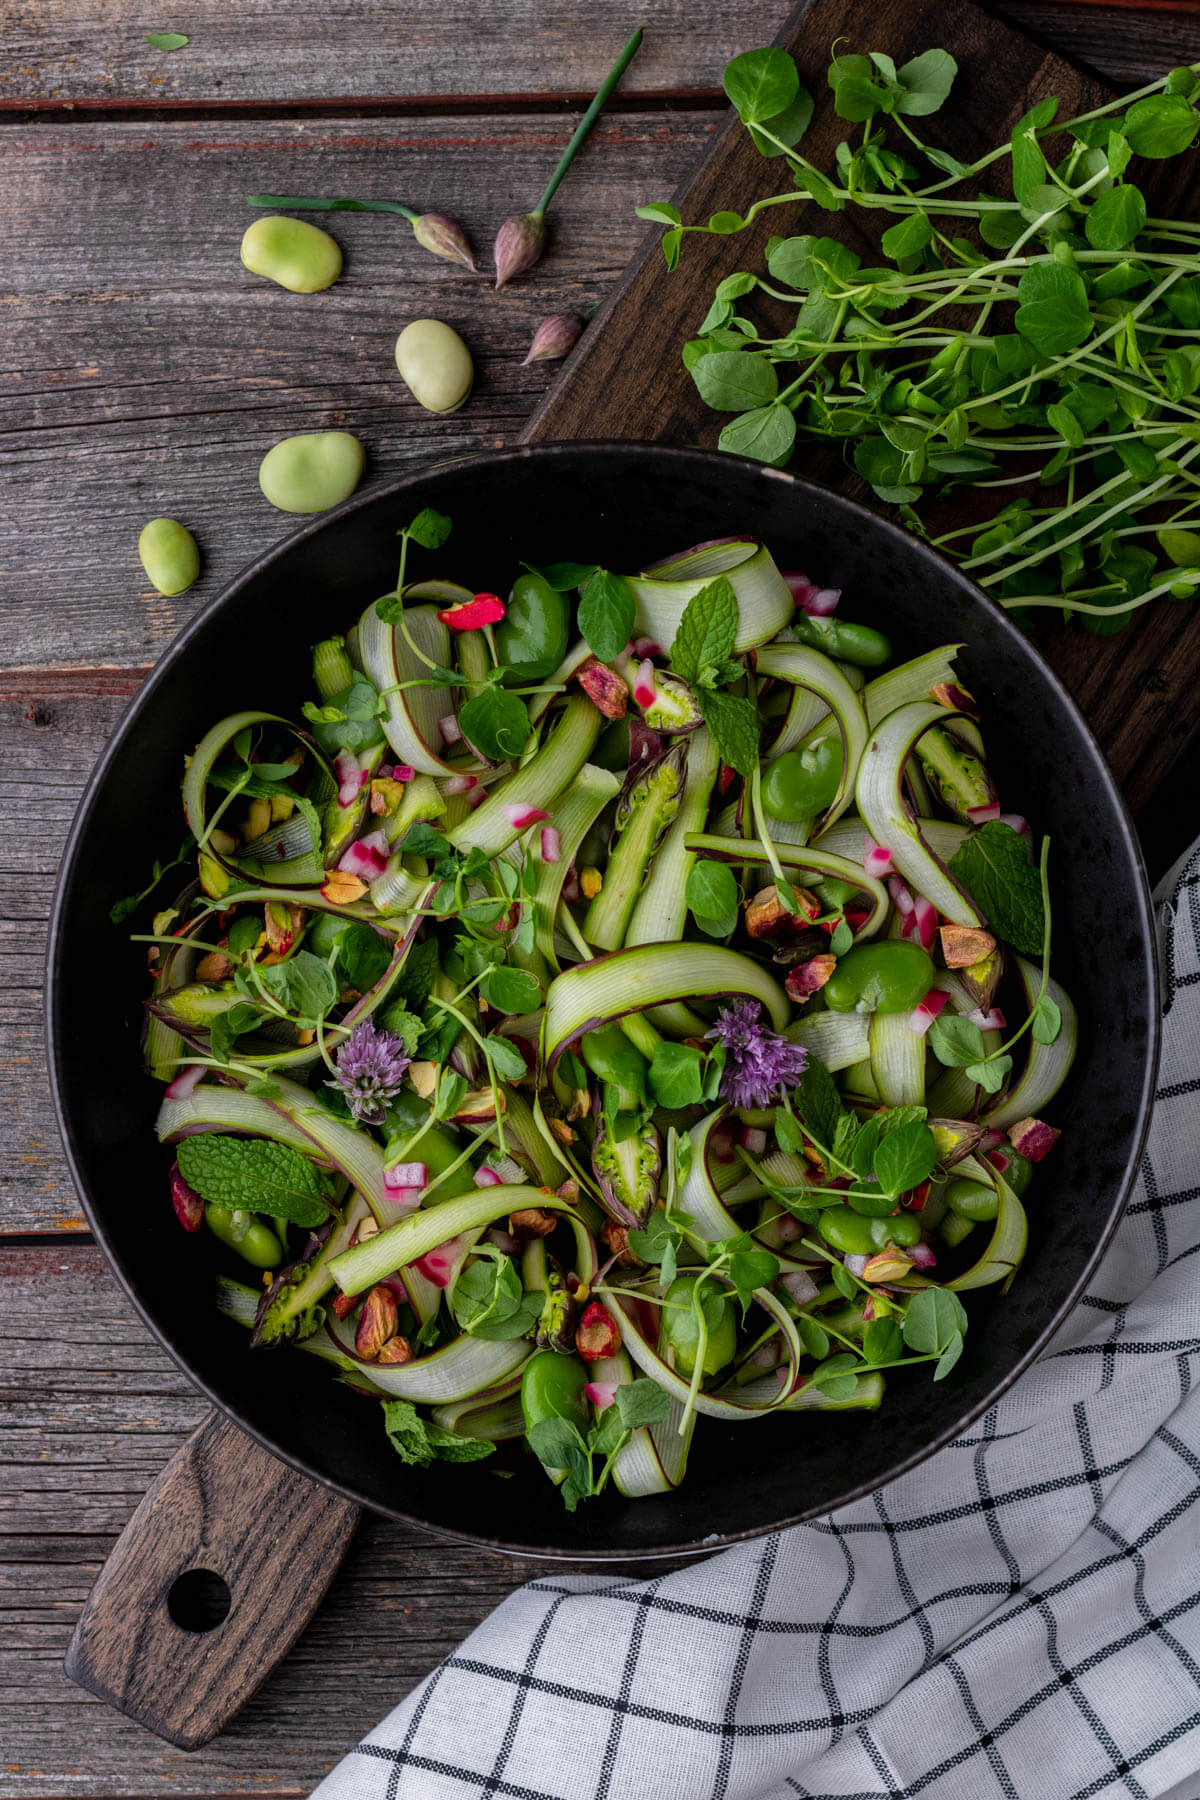 A wide black bowl filled with purple and green shaved asparagus, pistachios, fava beans, fresh herbs and purple chive flowers.